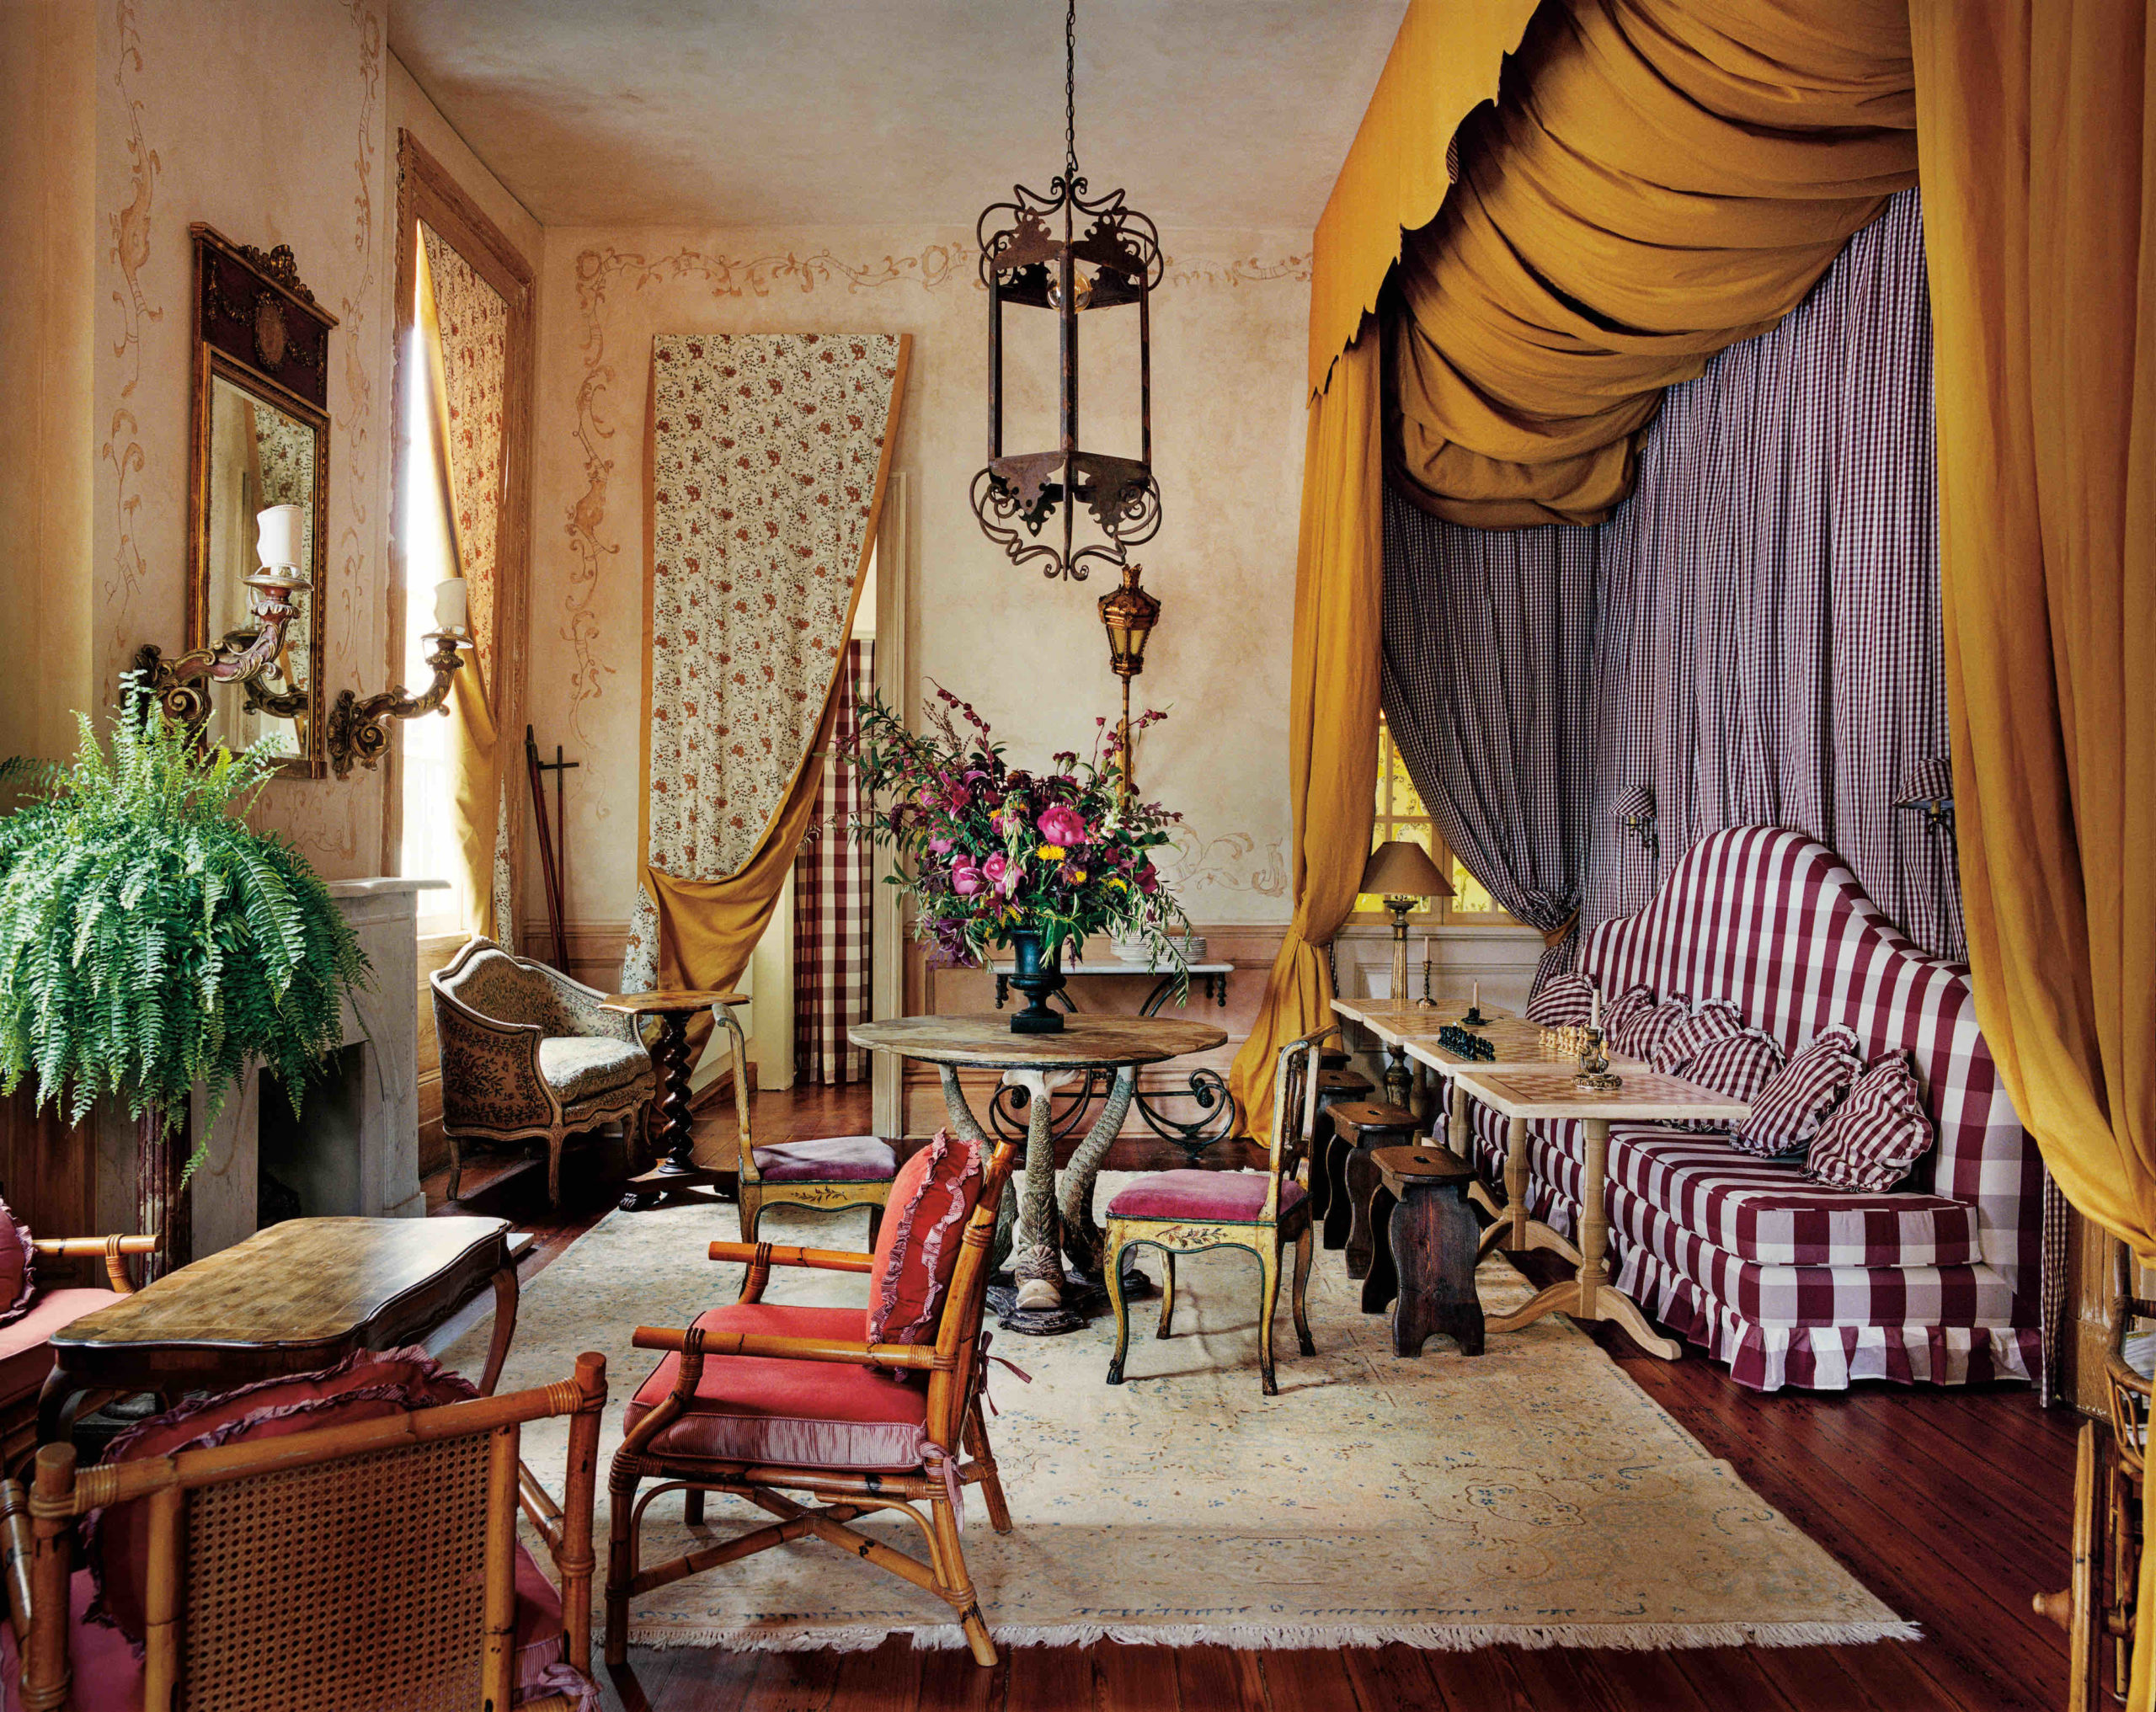 ‘CHECKING’ IN : From Gingham to Gustavian, Step into the romance of Hotel Peter & Paul